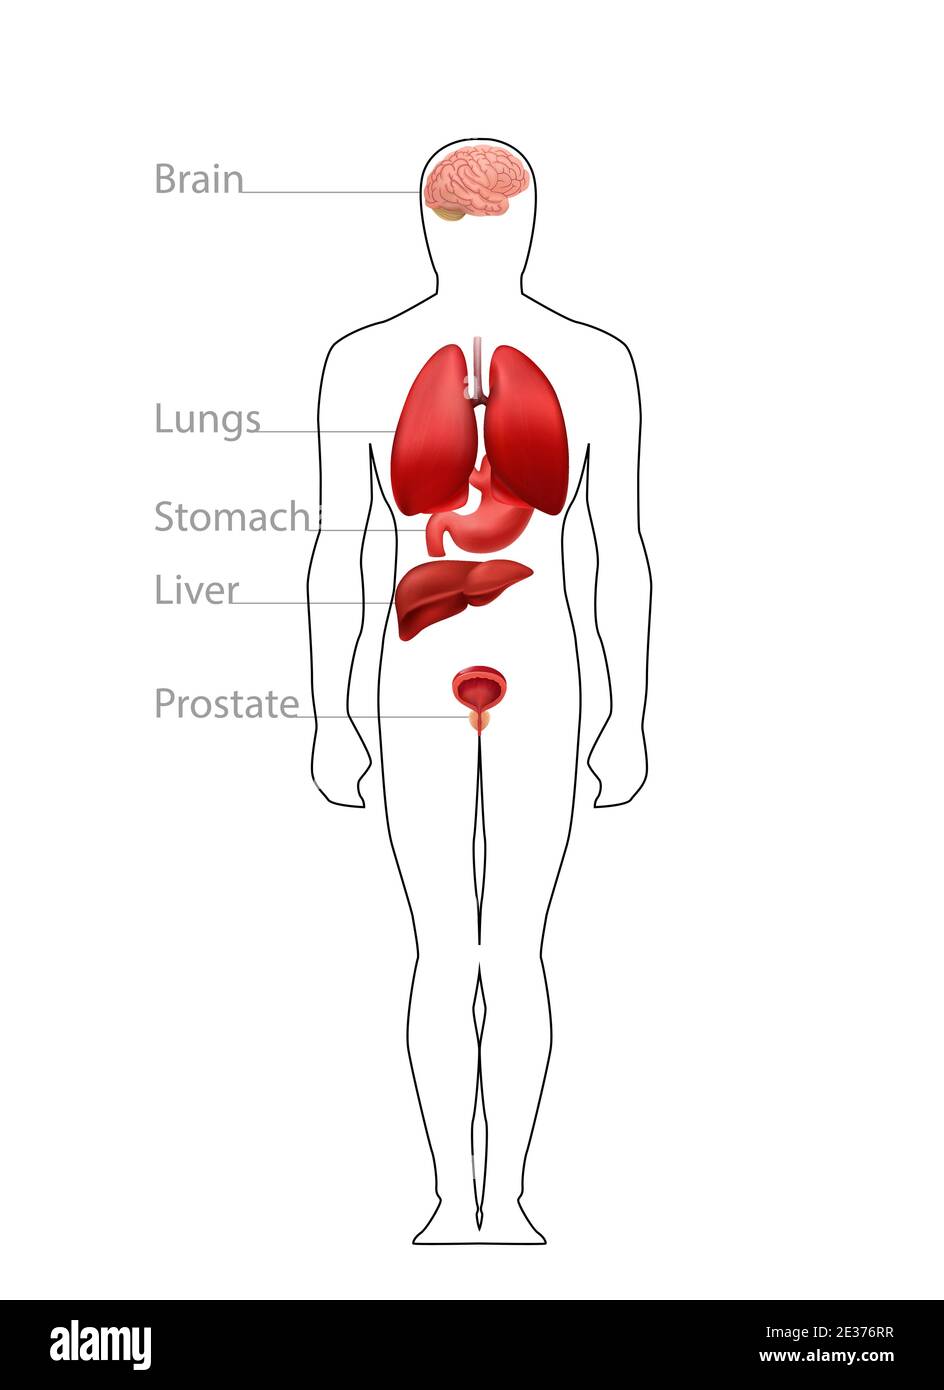 Location organs in male body. Physiological structure diagram of brain and lungs anatomical work. Stock Vector